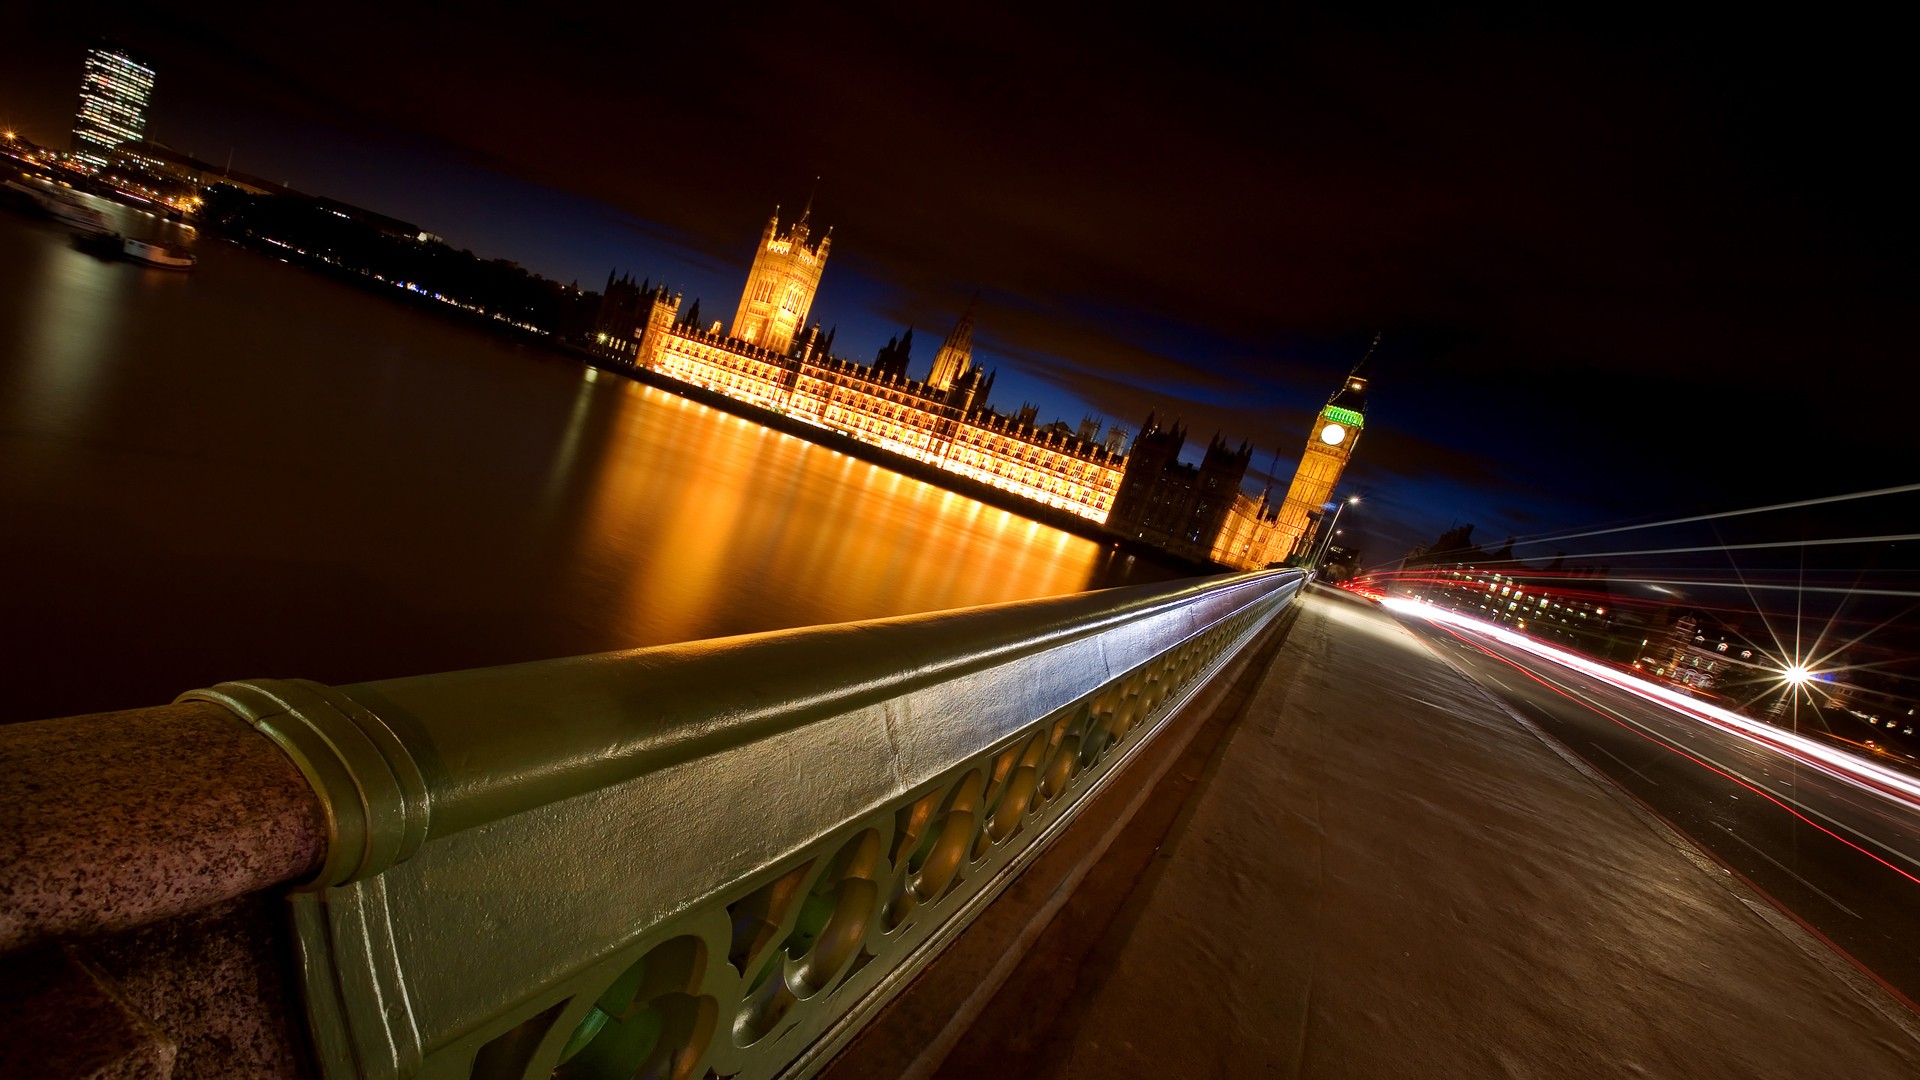 Cityscape London River Thames Westminster Bridge Photography Water Night Building Architecture Light 1920x1080